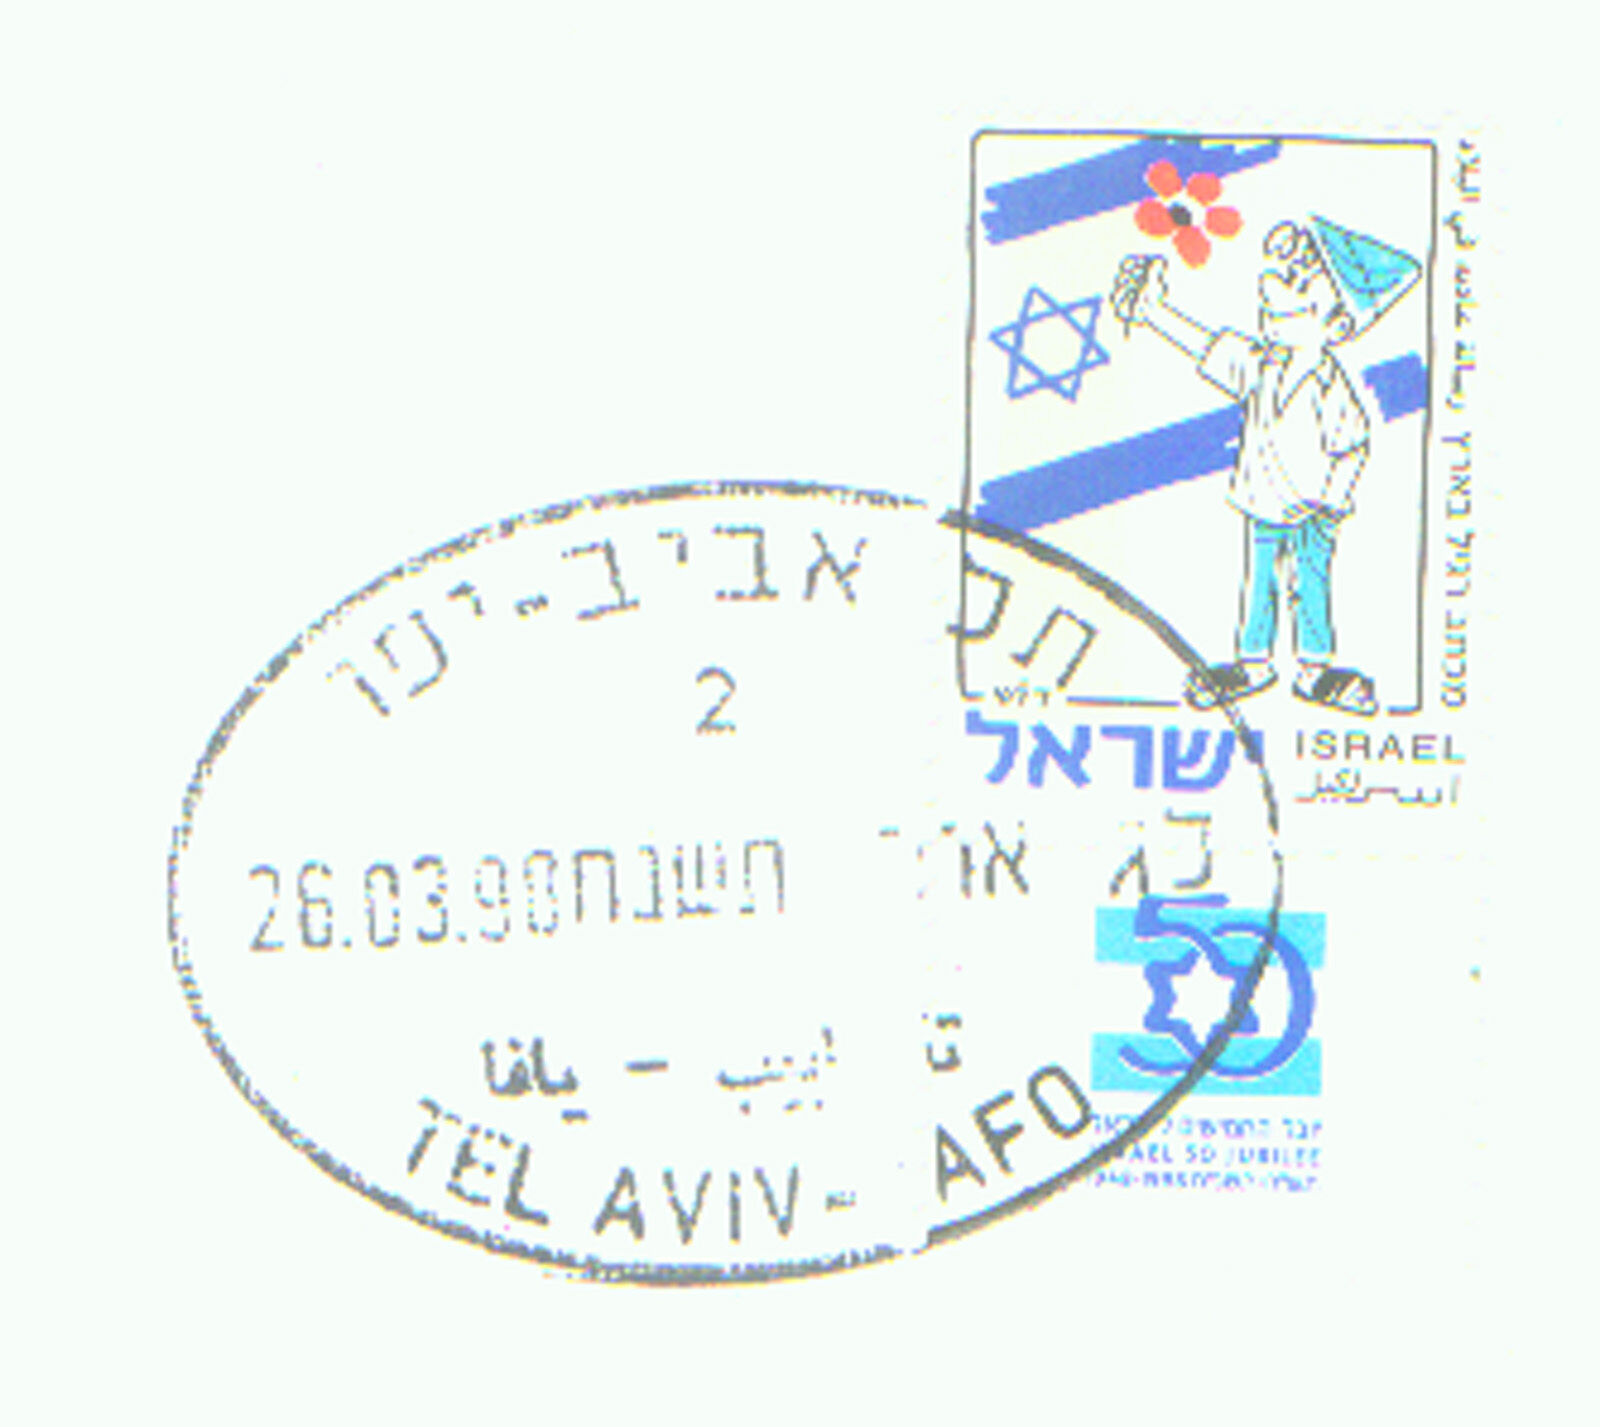 ISRAEL MAIMONIDES P # 51a of 1986 in a STAMPED WINDOWED ENVELOPE with MAP & INFO